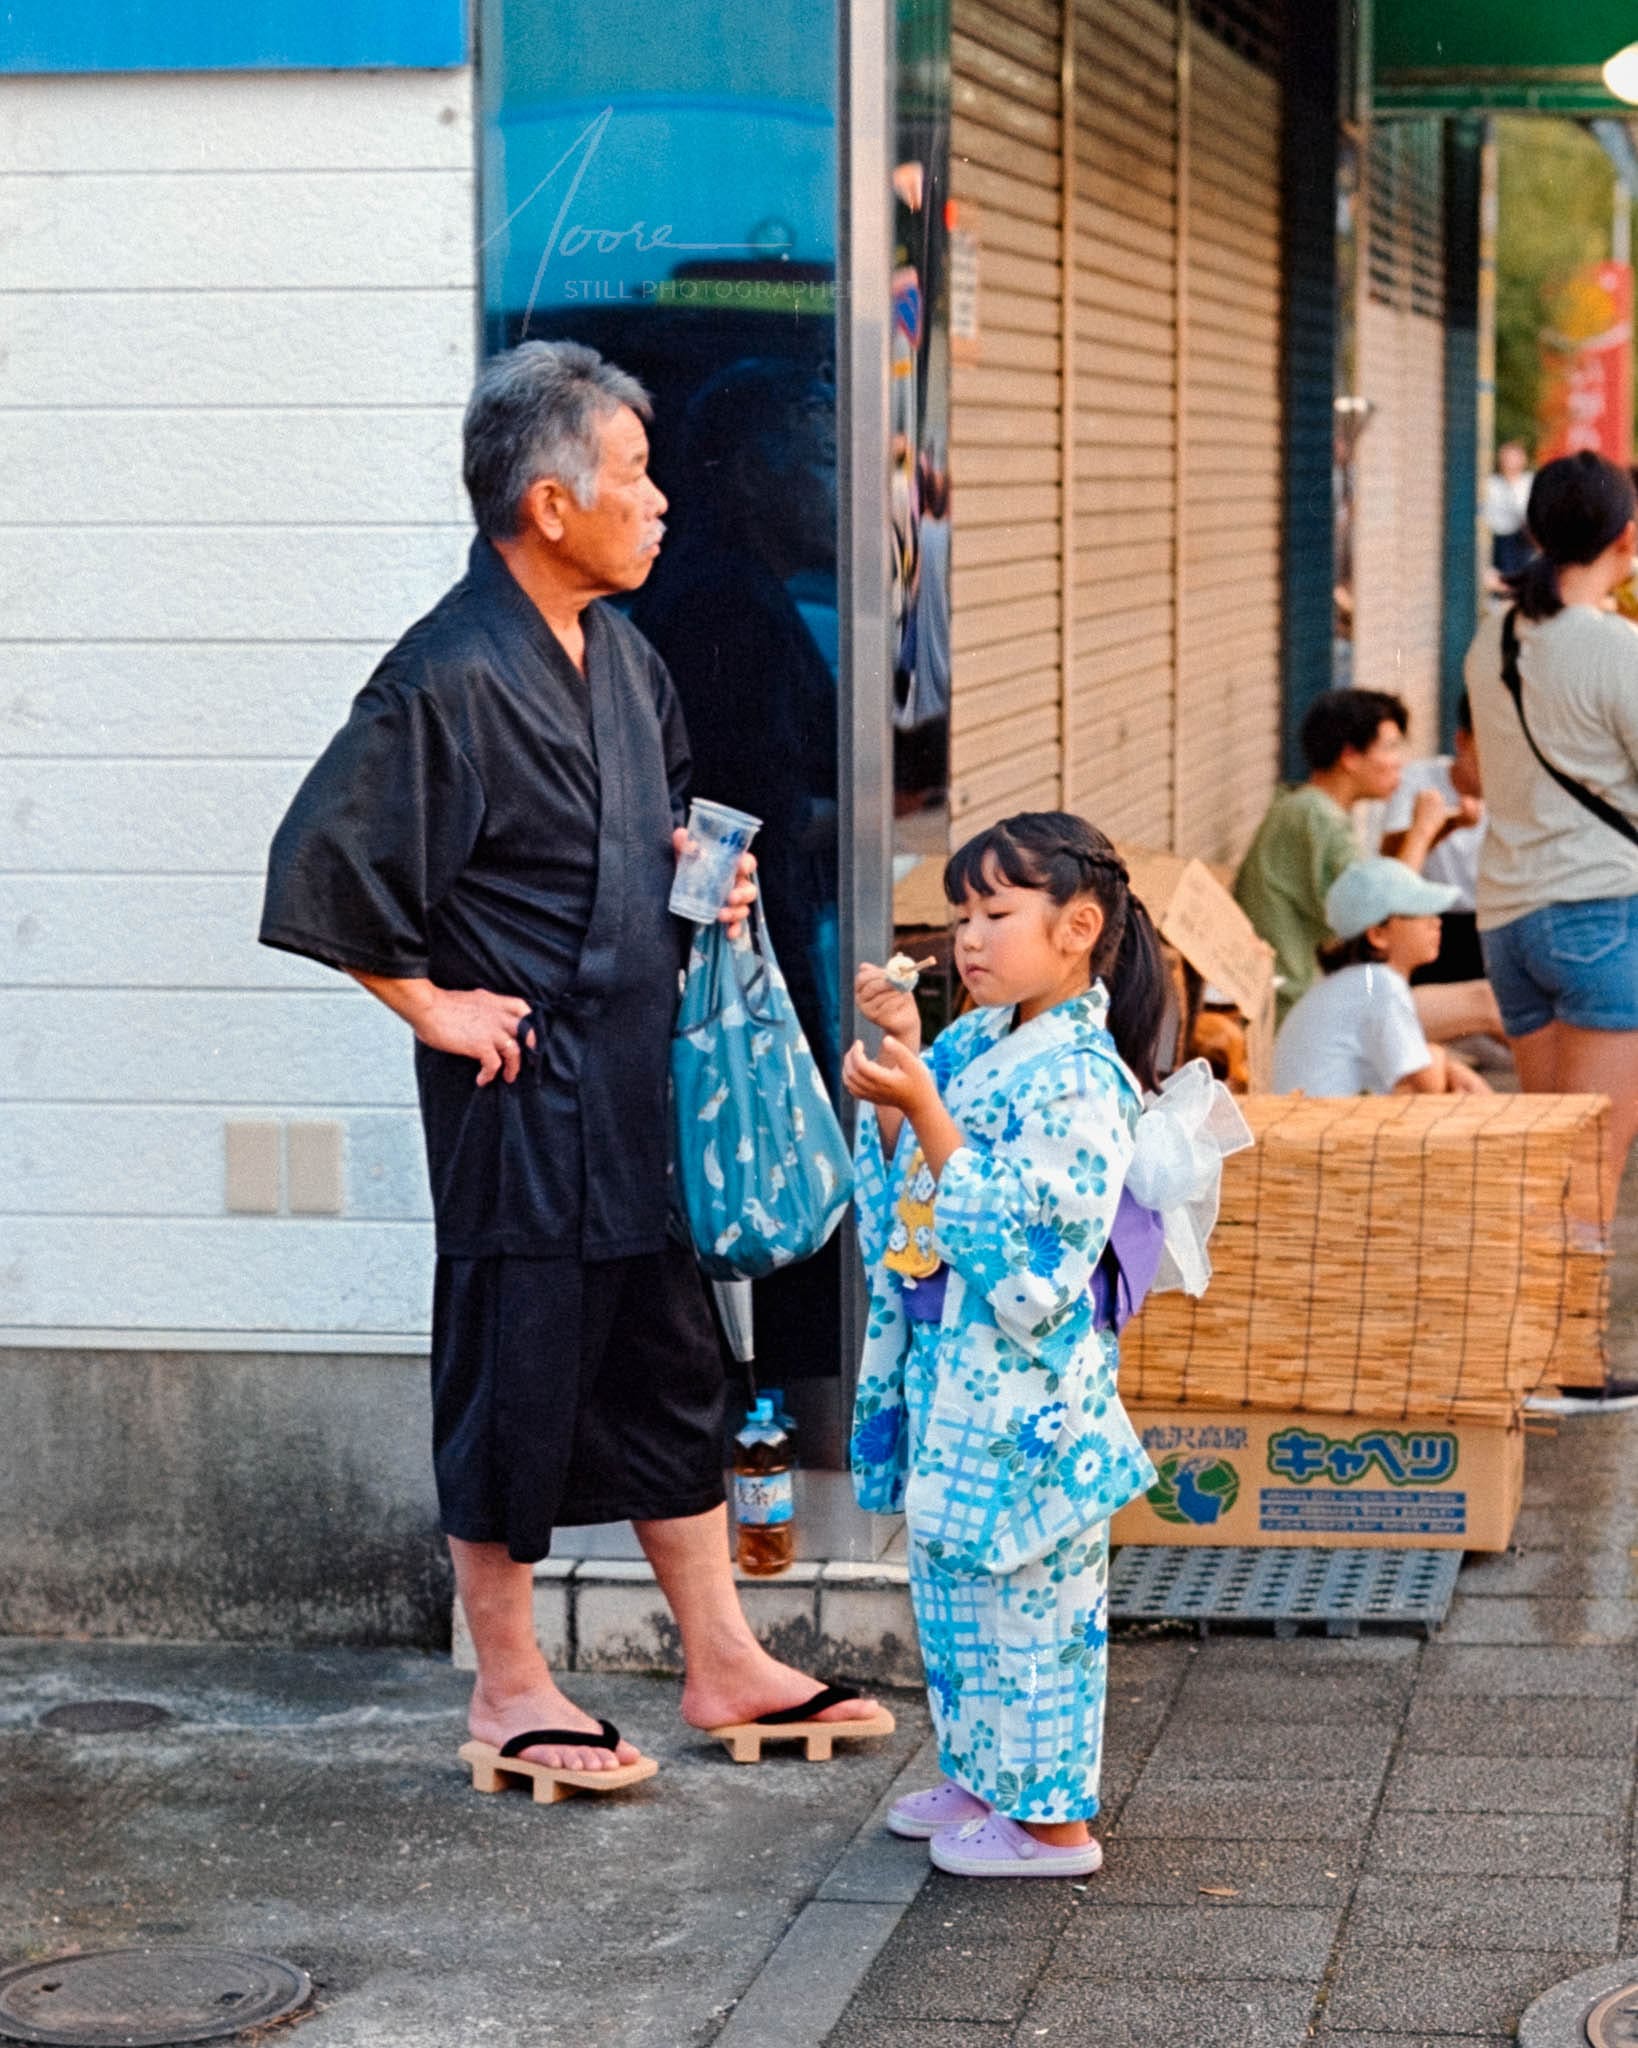 Old man and young girl in traditional Japanese yukata on urban sidewalk, blending culture and modernity.